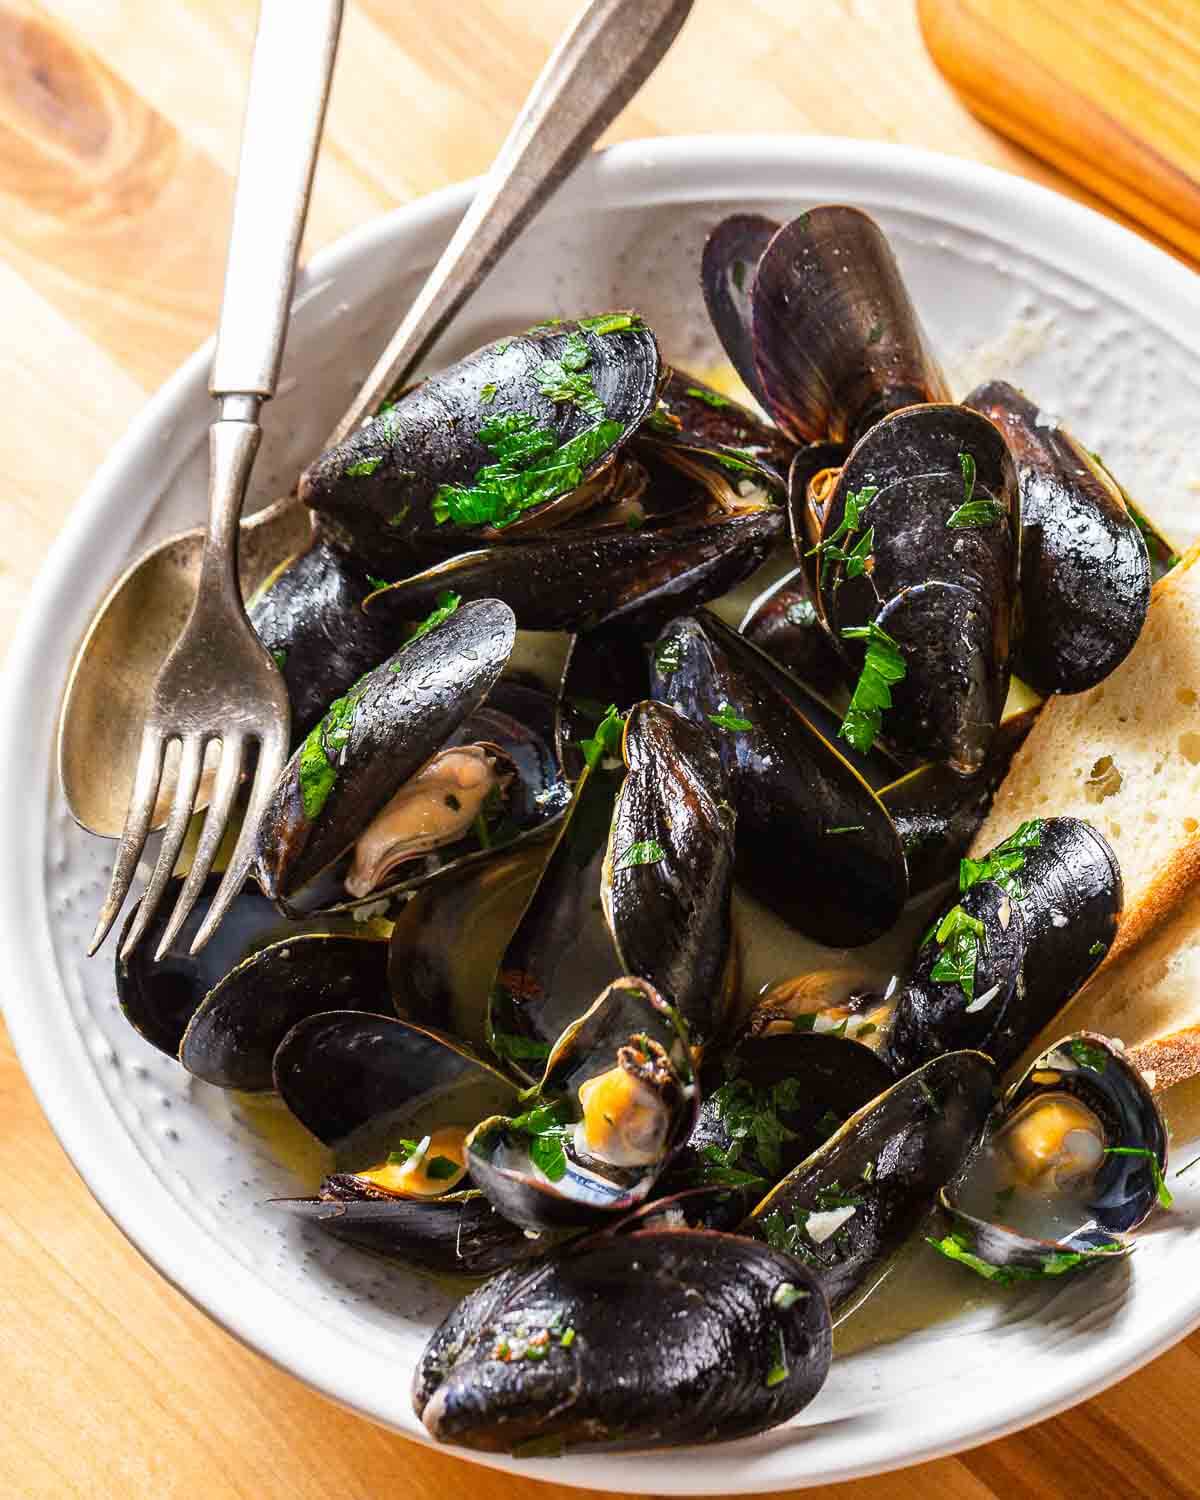 Mussels with white wine sauce in white plate.